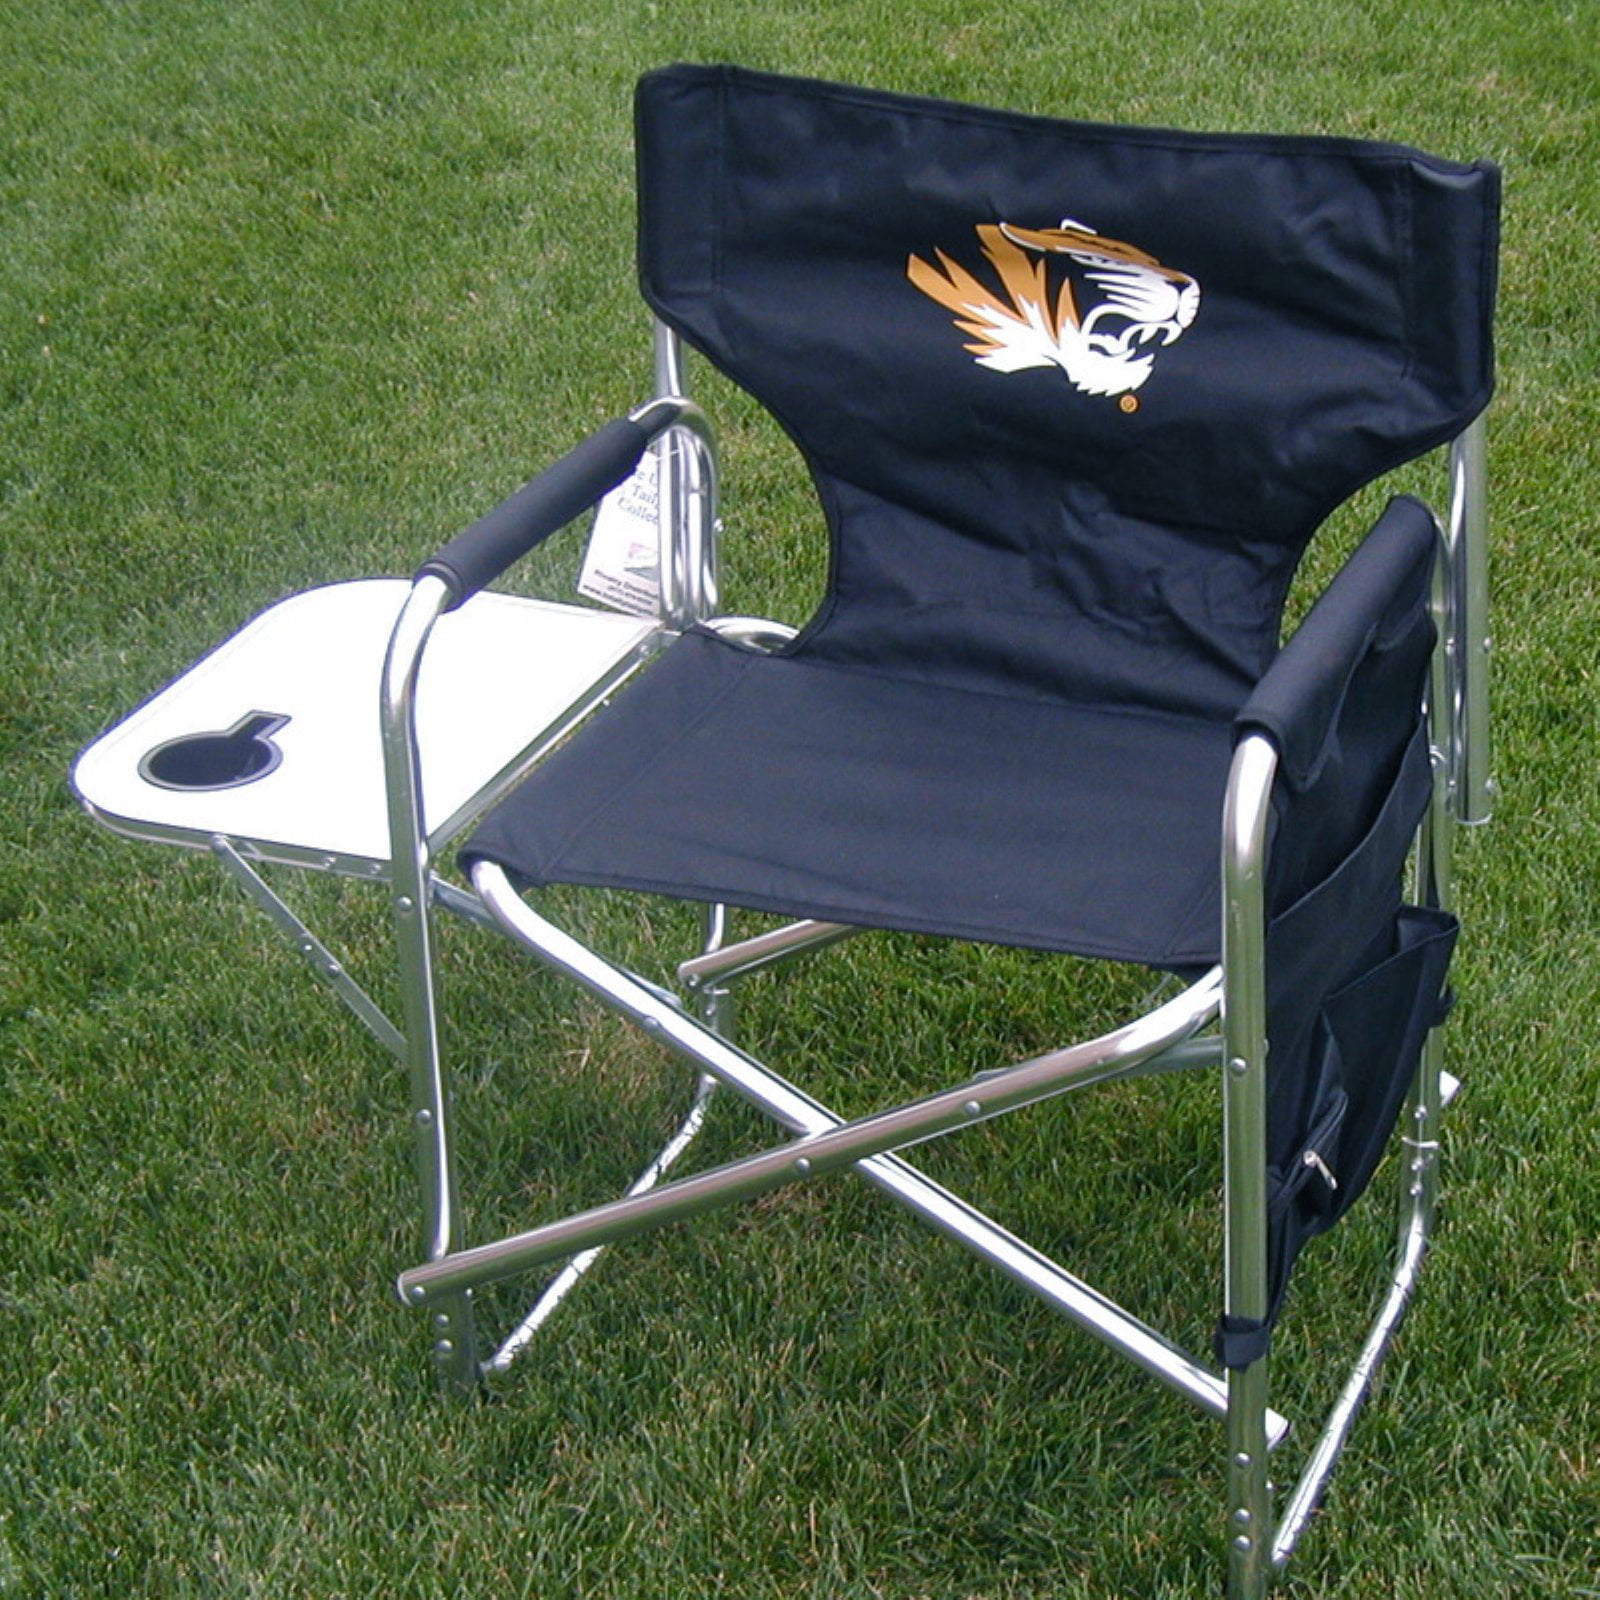 Rivalry NCAA Bowling Green Falcons Folding Chair With Bag